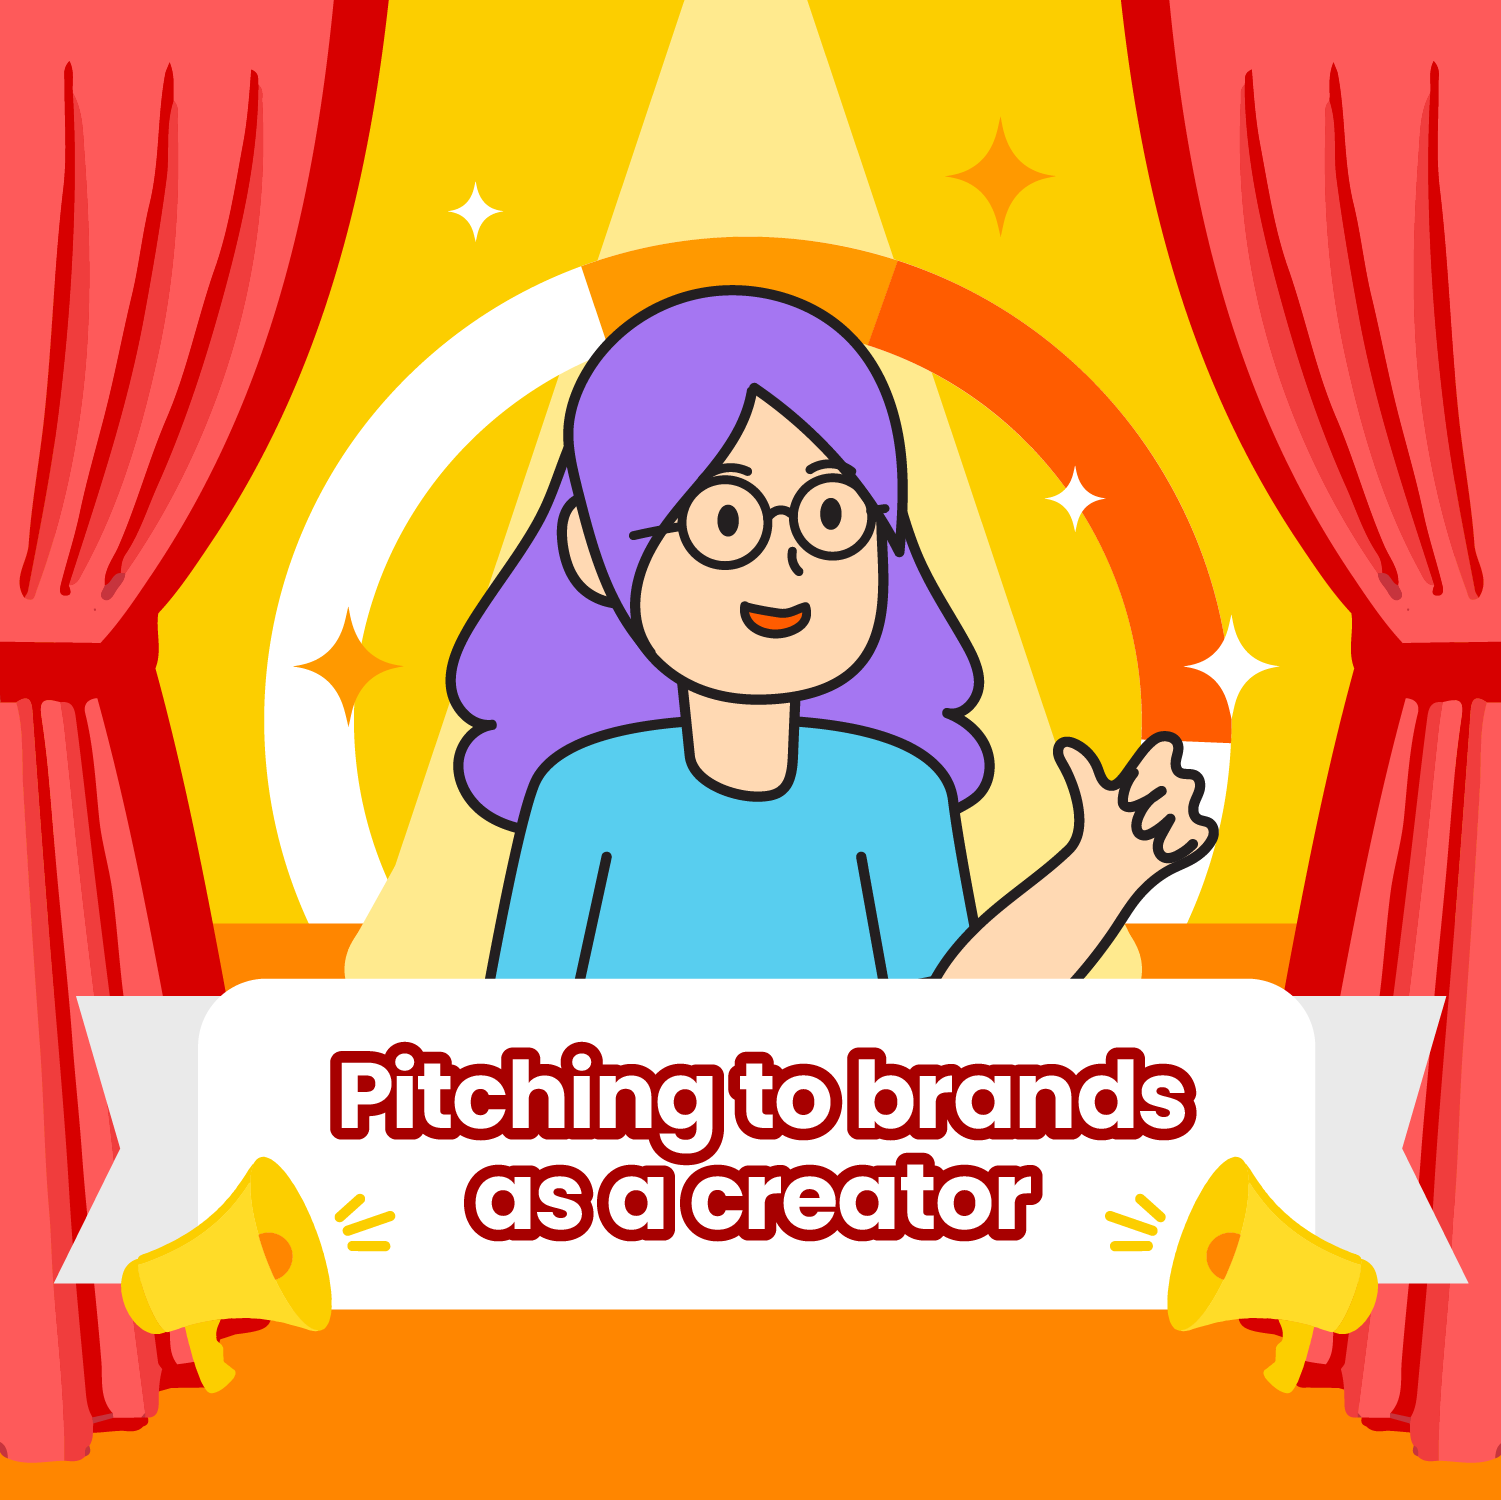 How to pitch a brand as a content creator